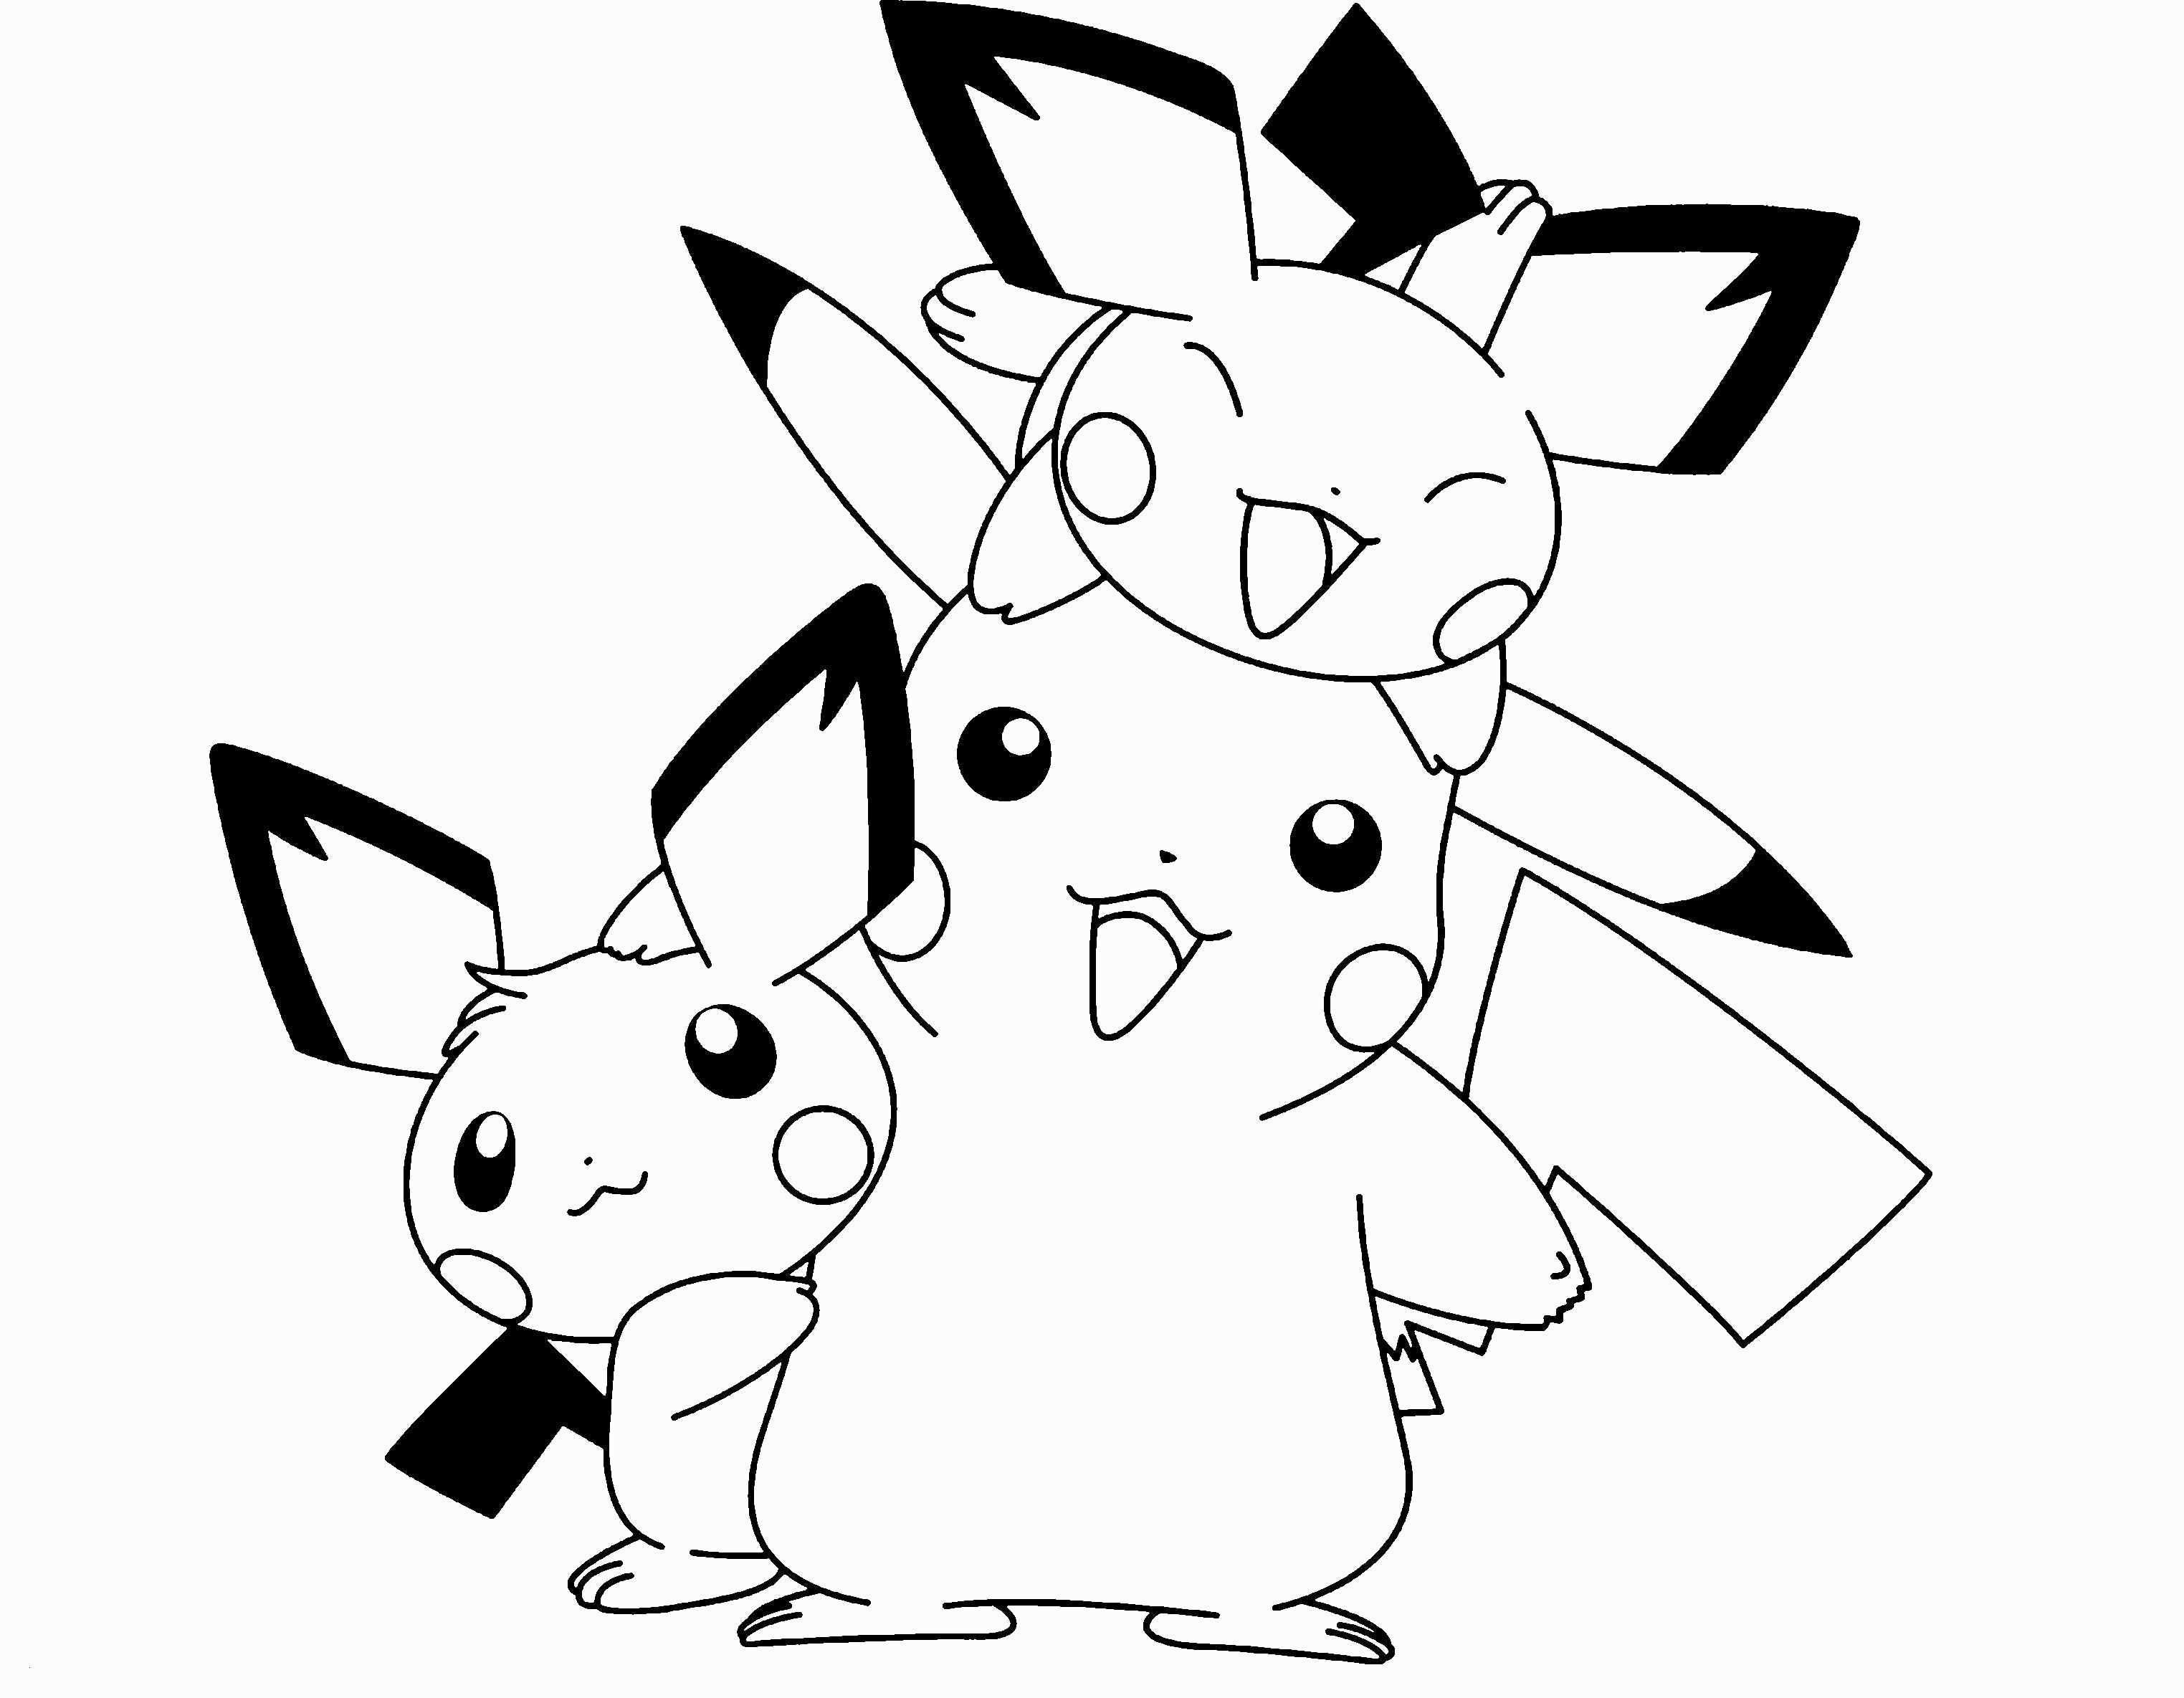 Pokemon Drawing Book Download Luxury Pokemon Coloring Pages Printable Elegant Pokemon Coloring Pikachu Coloring Page Pokemon Coloring Star Coloring Pages